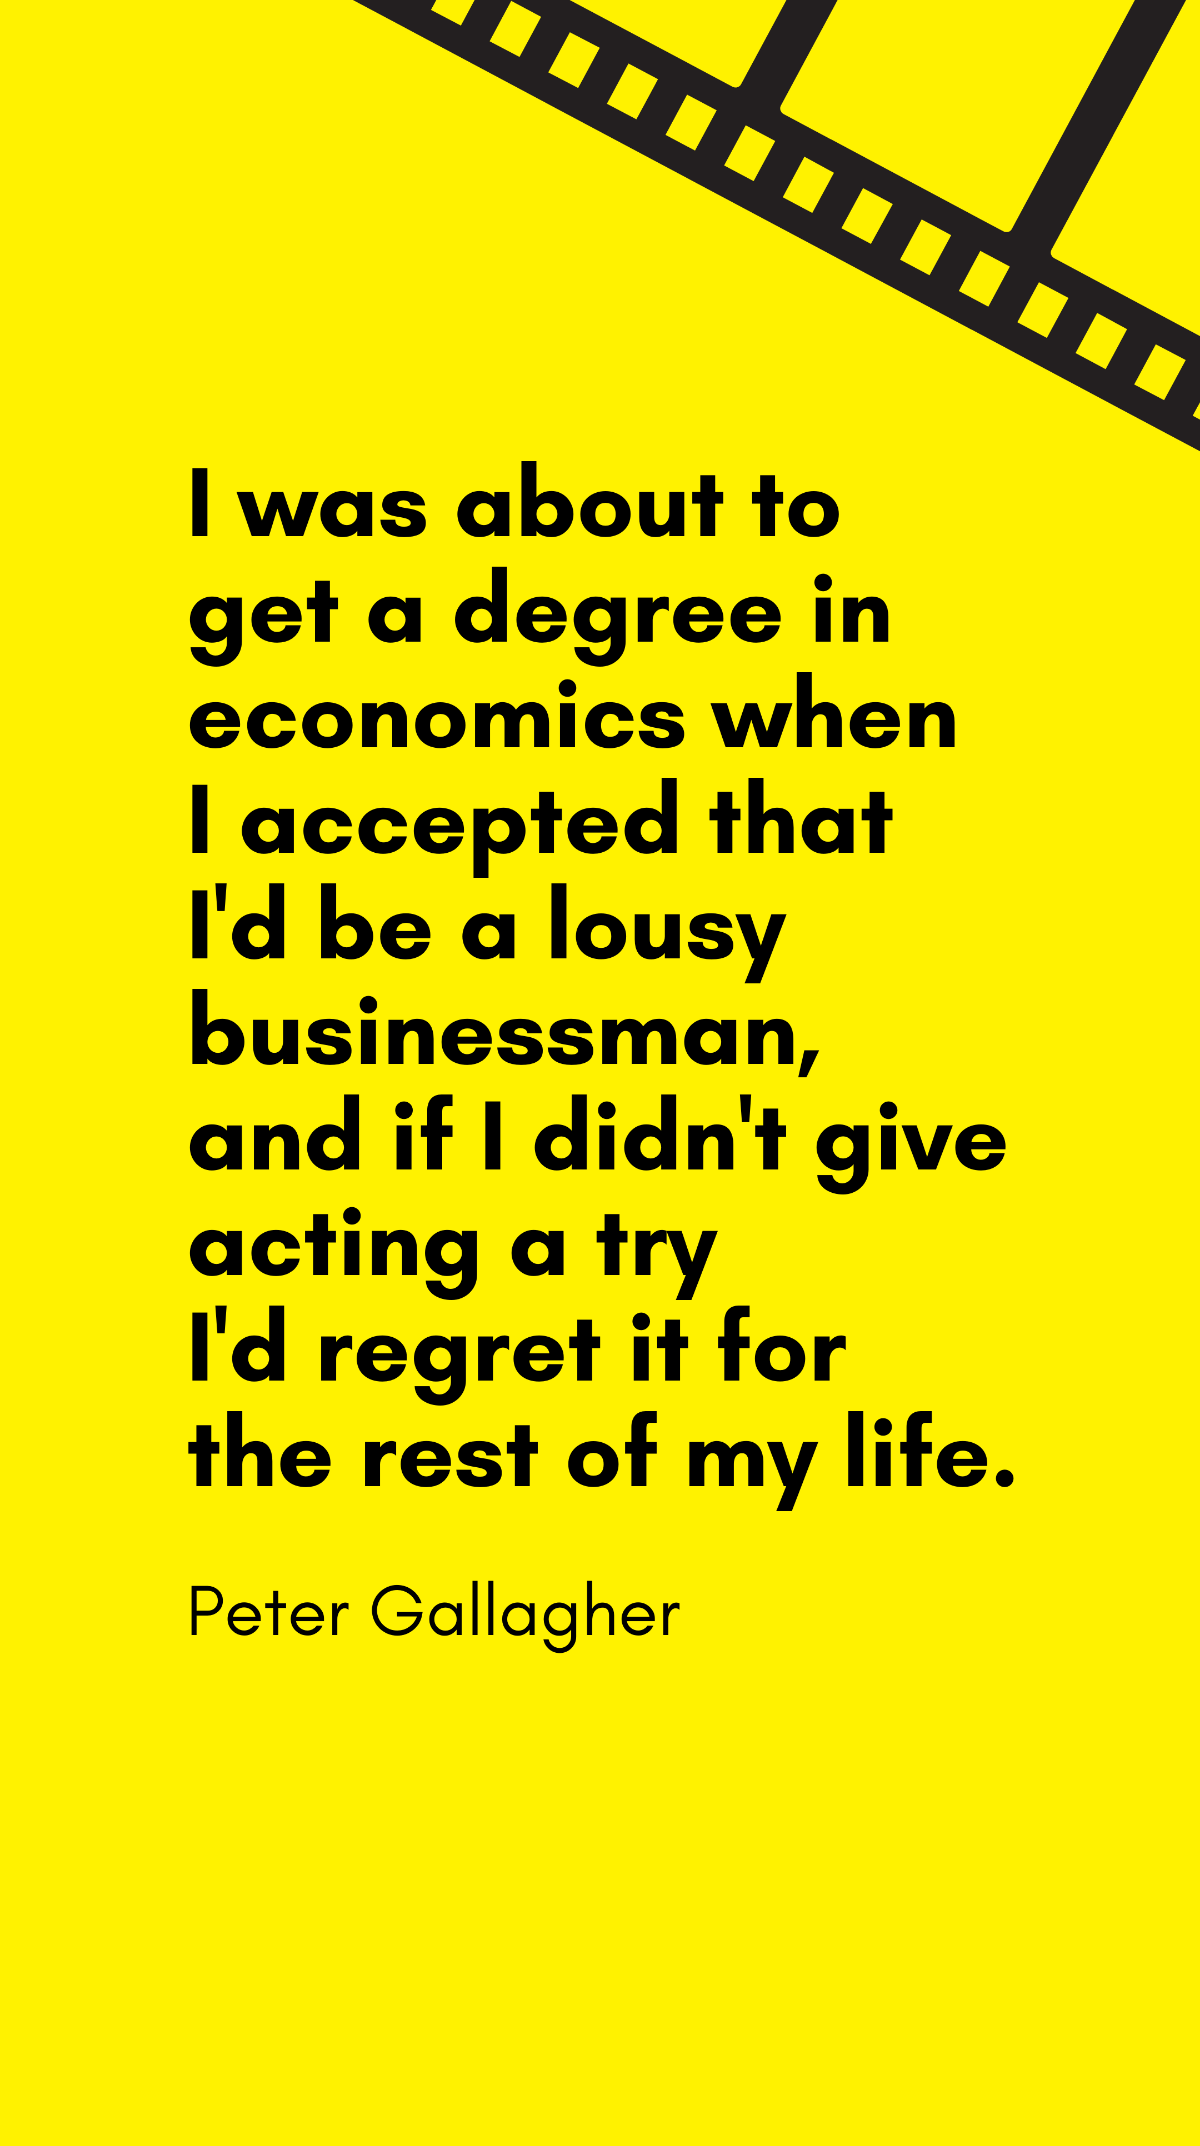 Peter Gallagher - I was about to get a degree in economics when I accepted that I'd be a lousy businessman, and if I didn't give acting a try I'd regret it for the rest of my life. Template